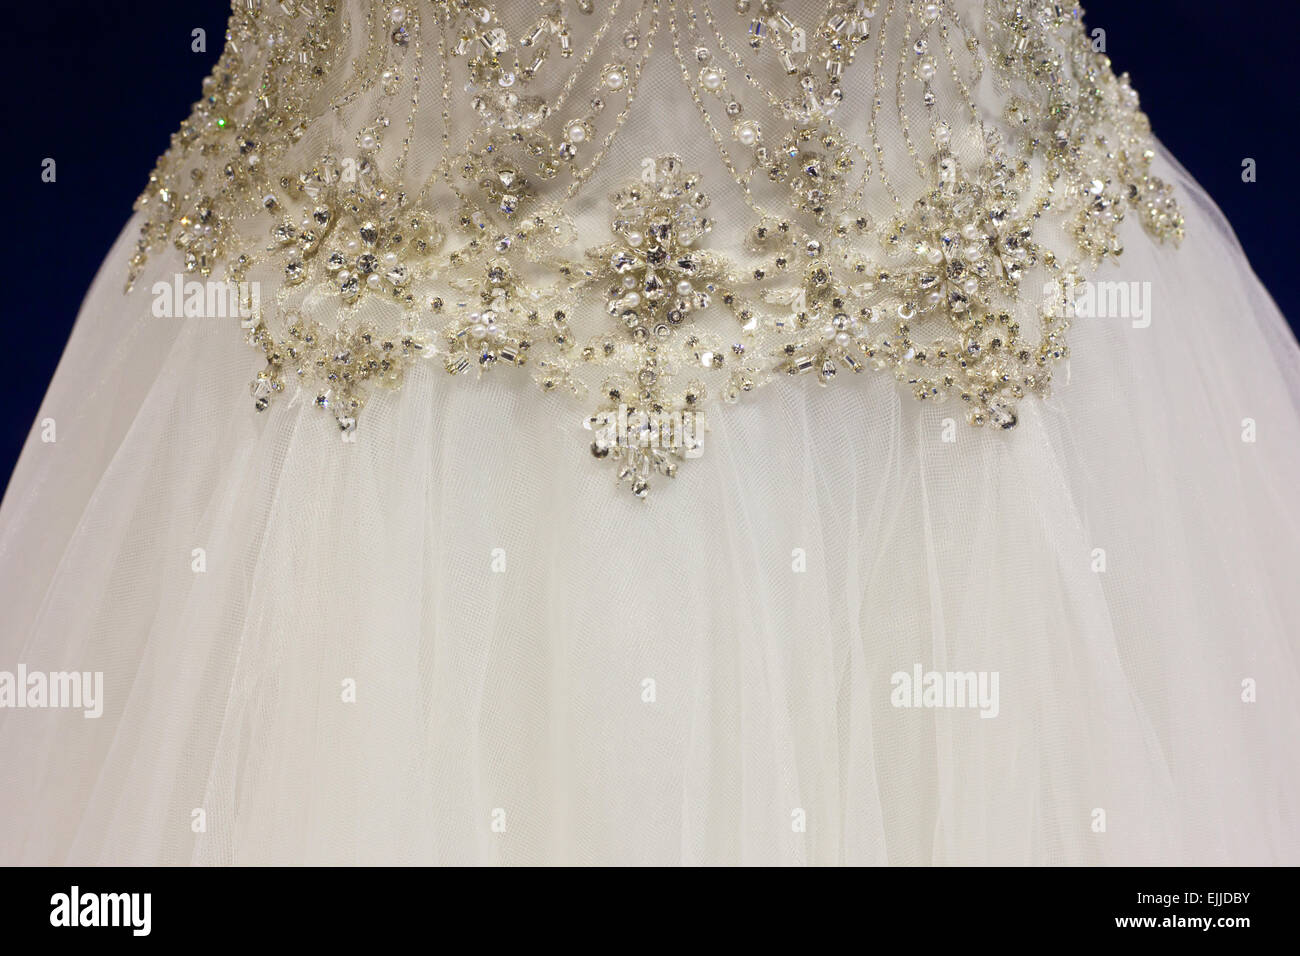 Detail of bridal gown with ornaments as pearls, silver and rhinestones Stock Photo